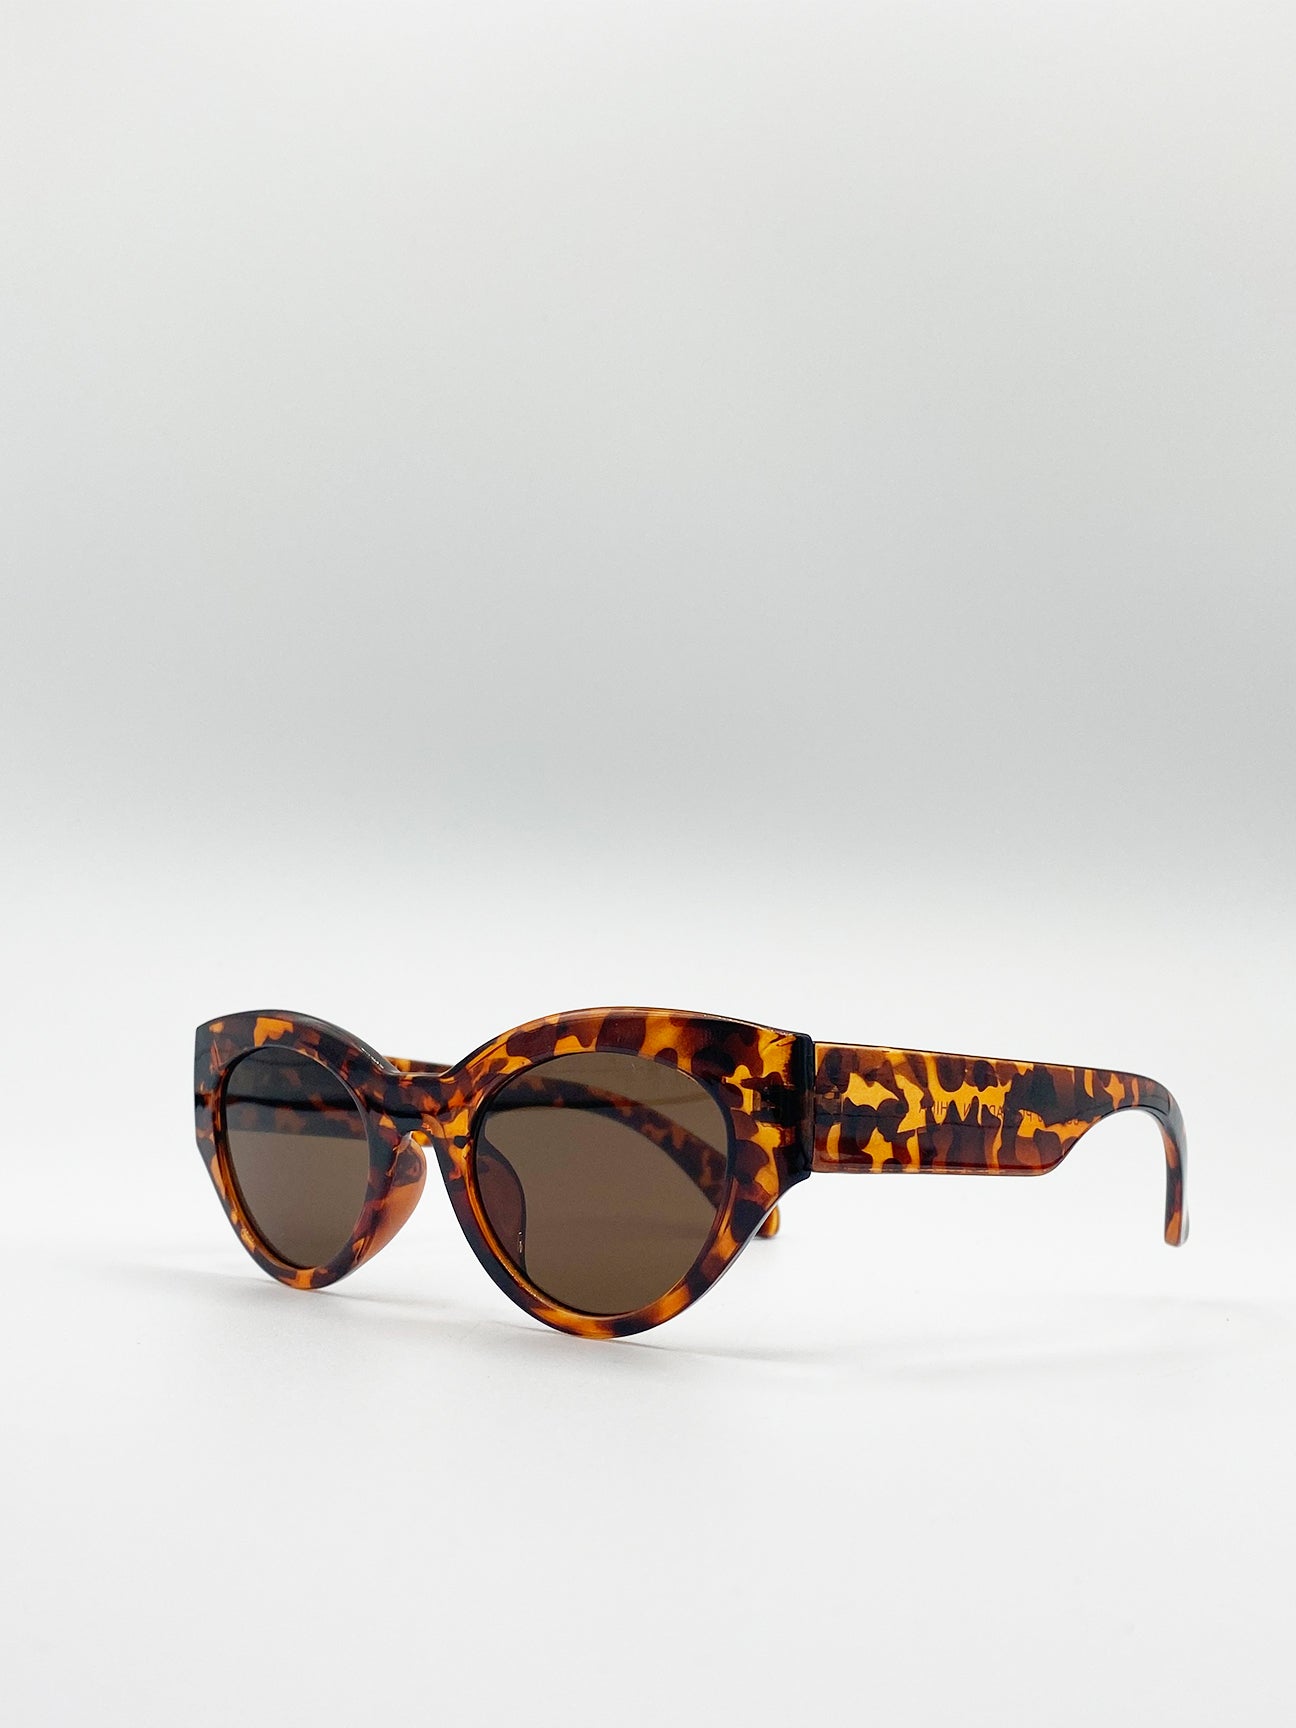 Brown Rounded Sunglasses In Tortoise Shell with Brown Mono Lenses